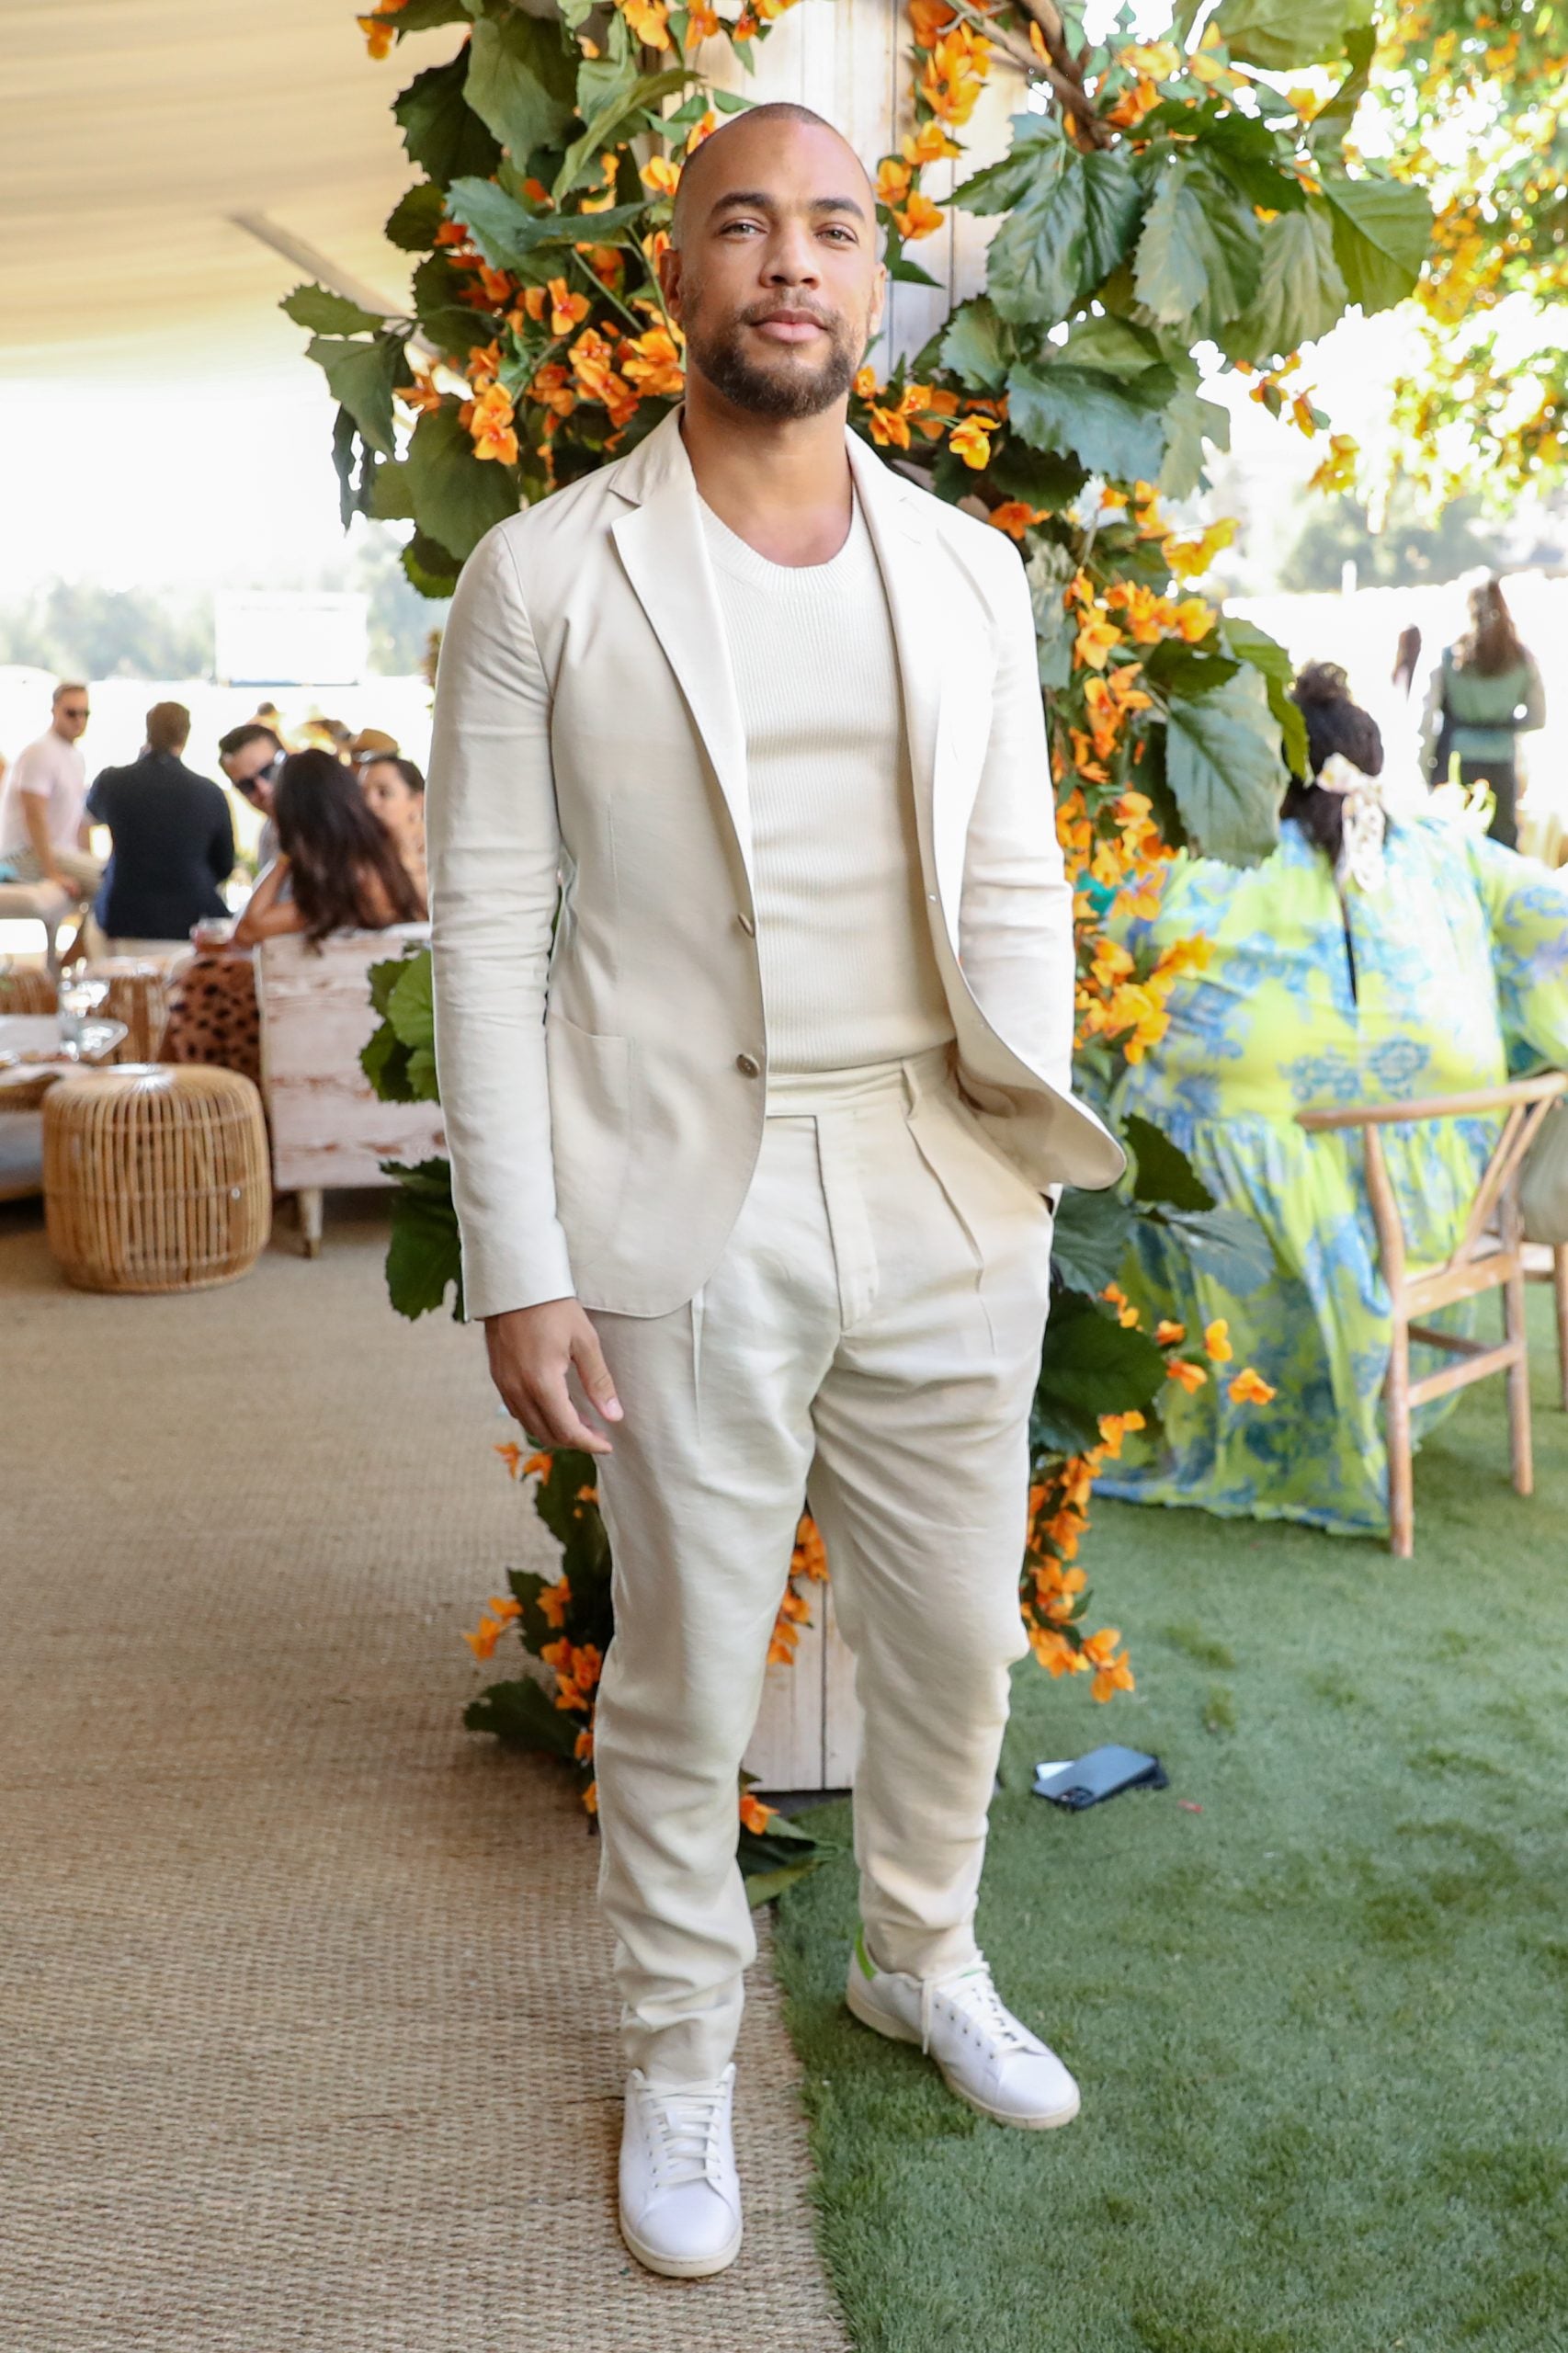 Every Single Black Person At The Veuve Clicquot Polo Classic Understood The Assignment